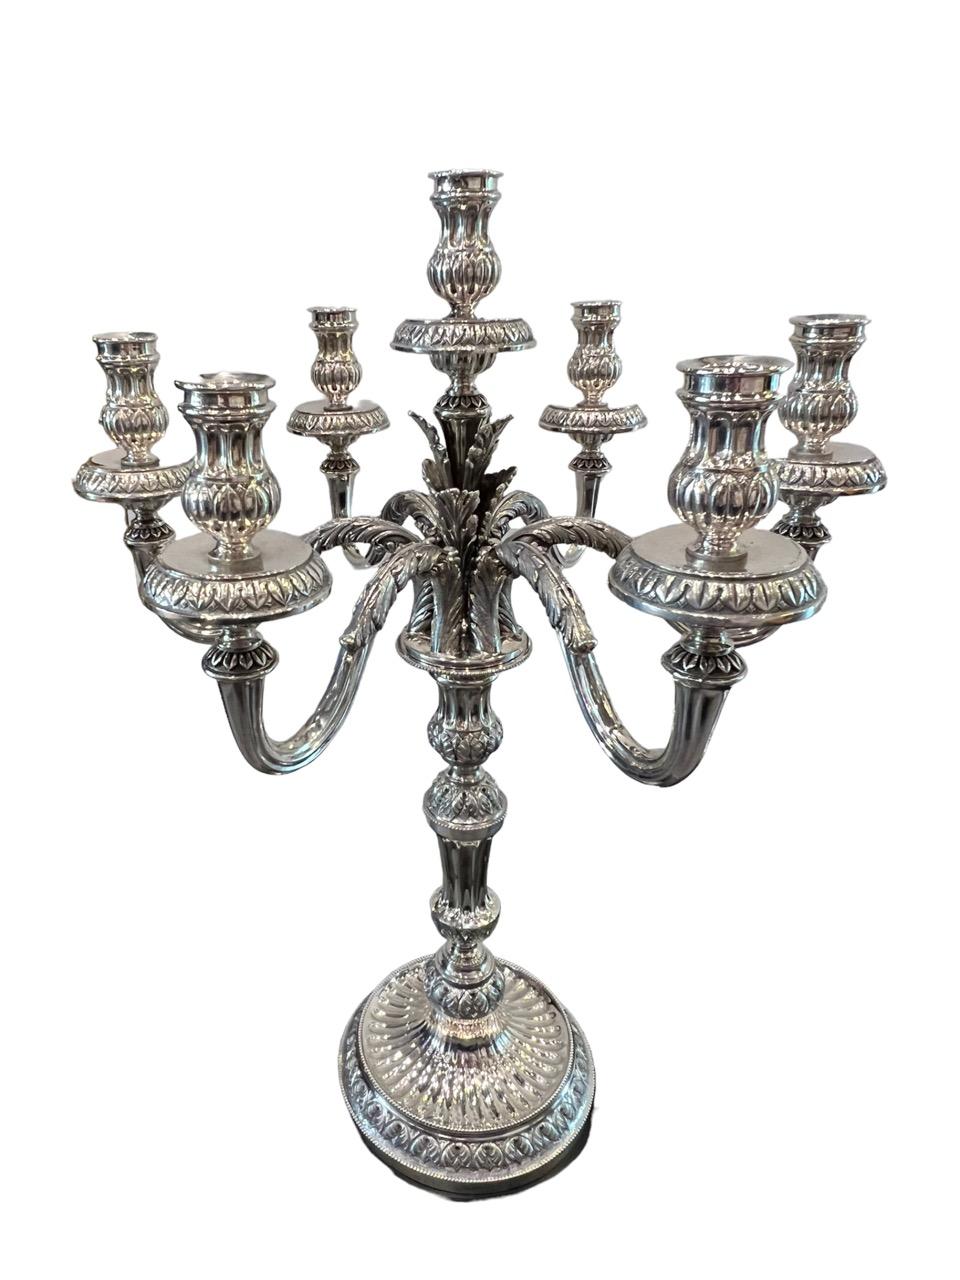 1910 Italian Pair of Sterling Silver Candelabras, Tall and Heavy 3